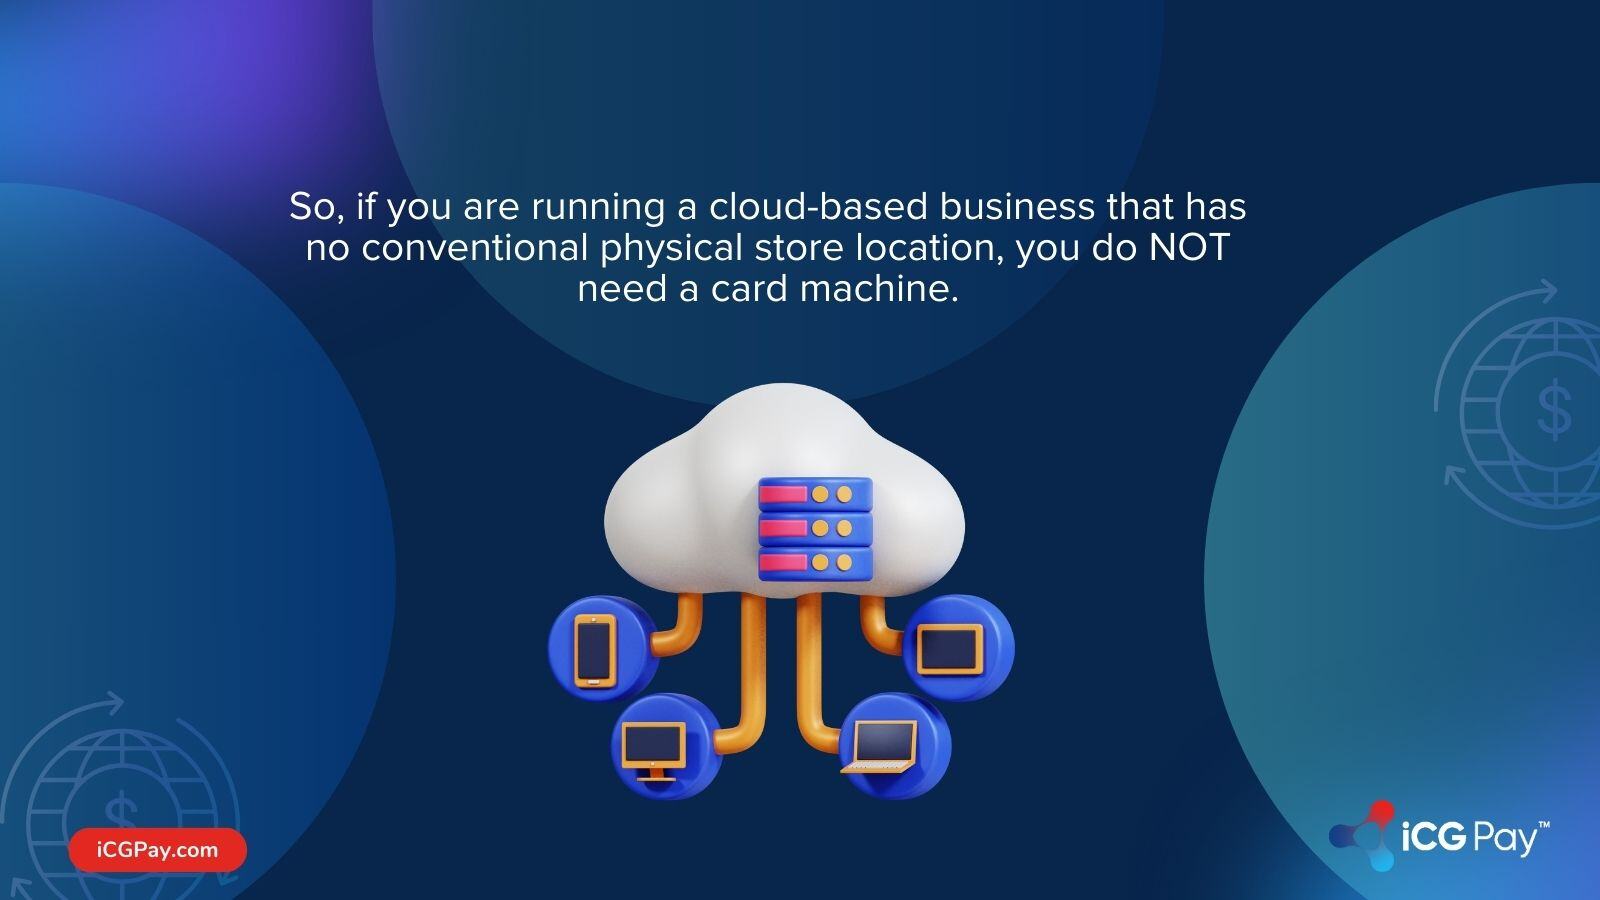 Cloud-based businesses and credit card machines